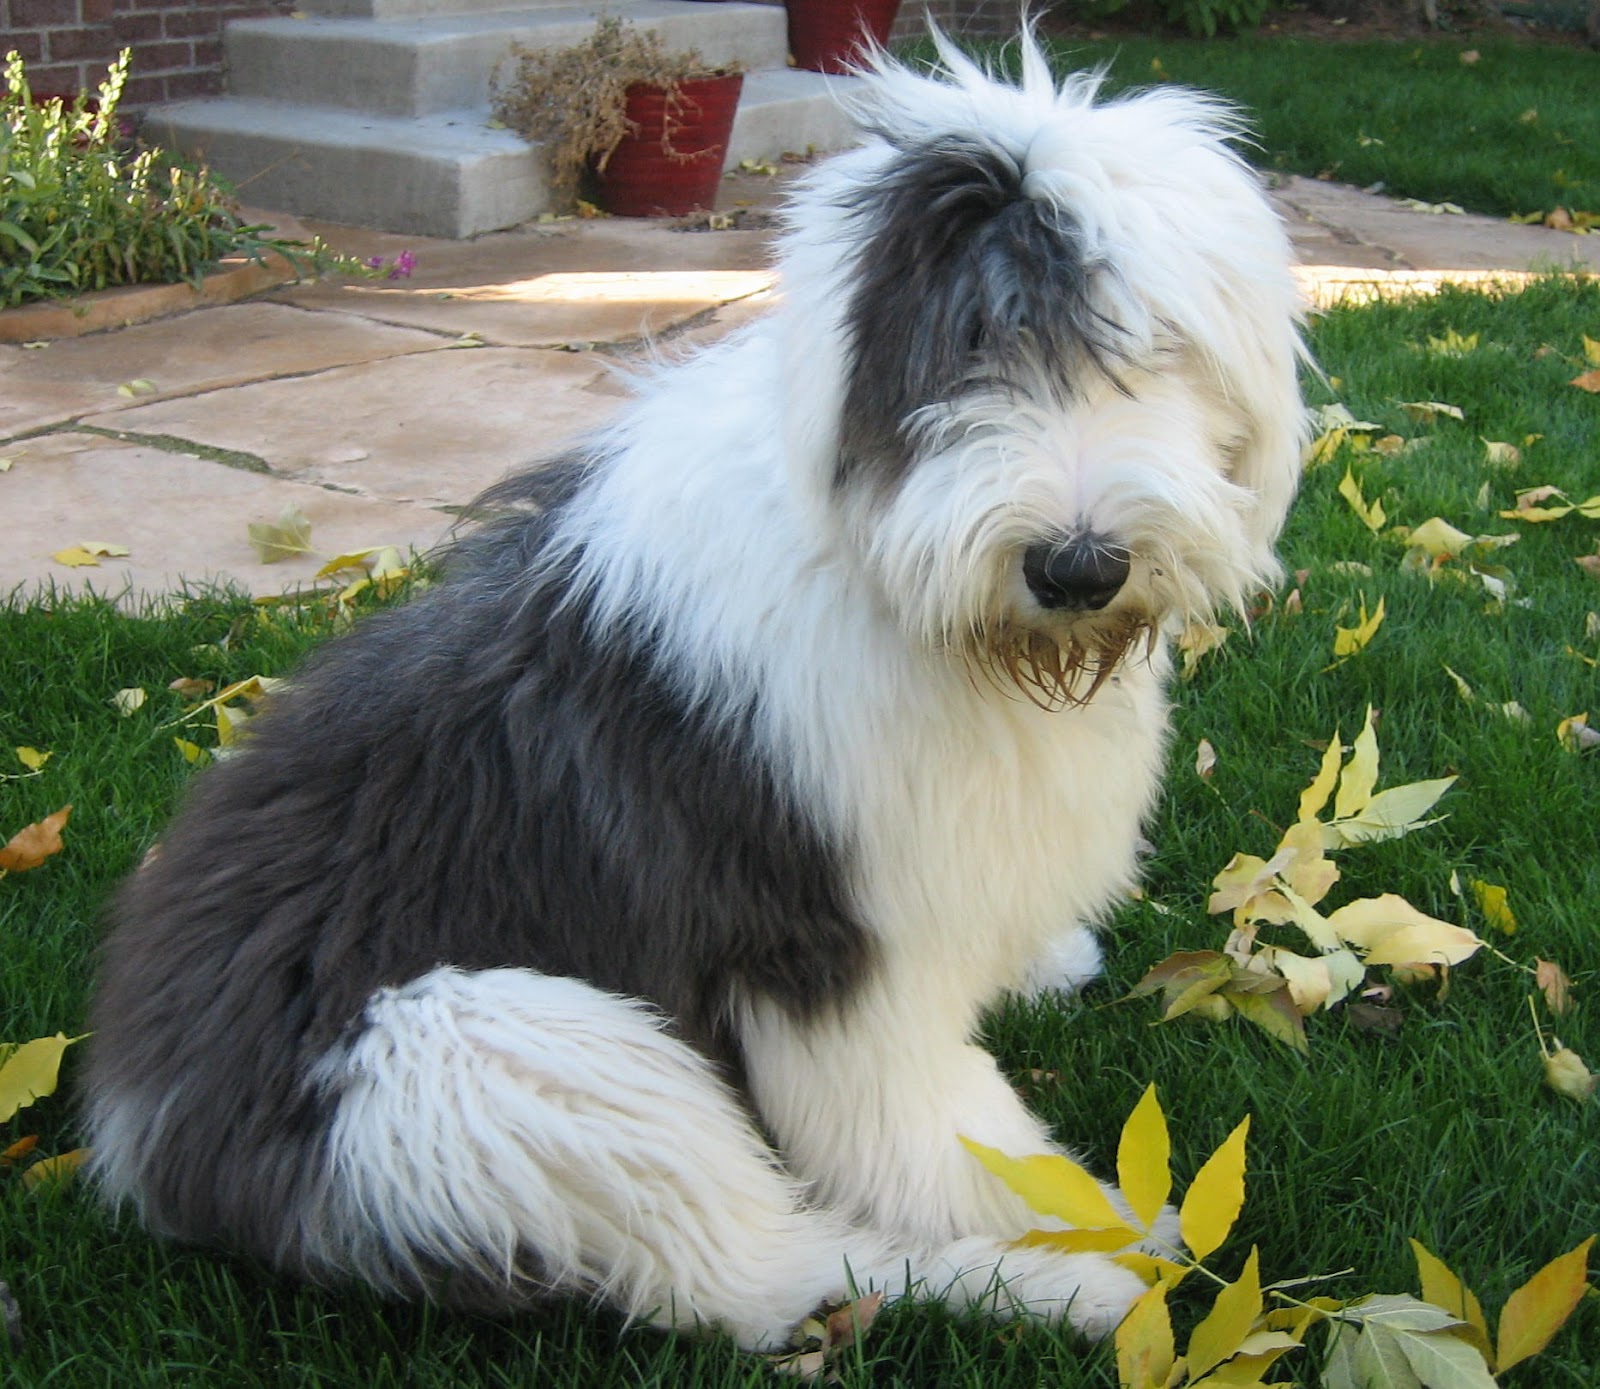 Such Good Dogs: Breed of the Month--Old English Sheepdog